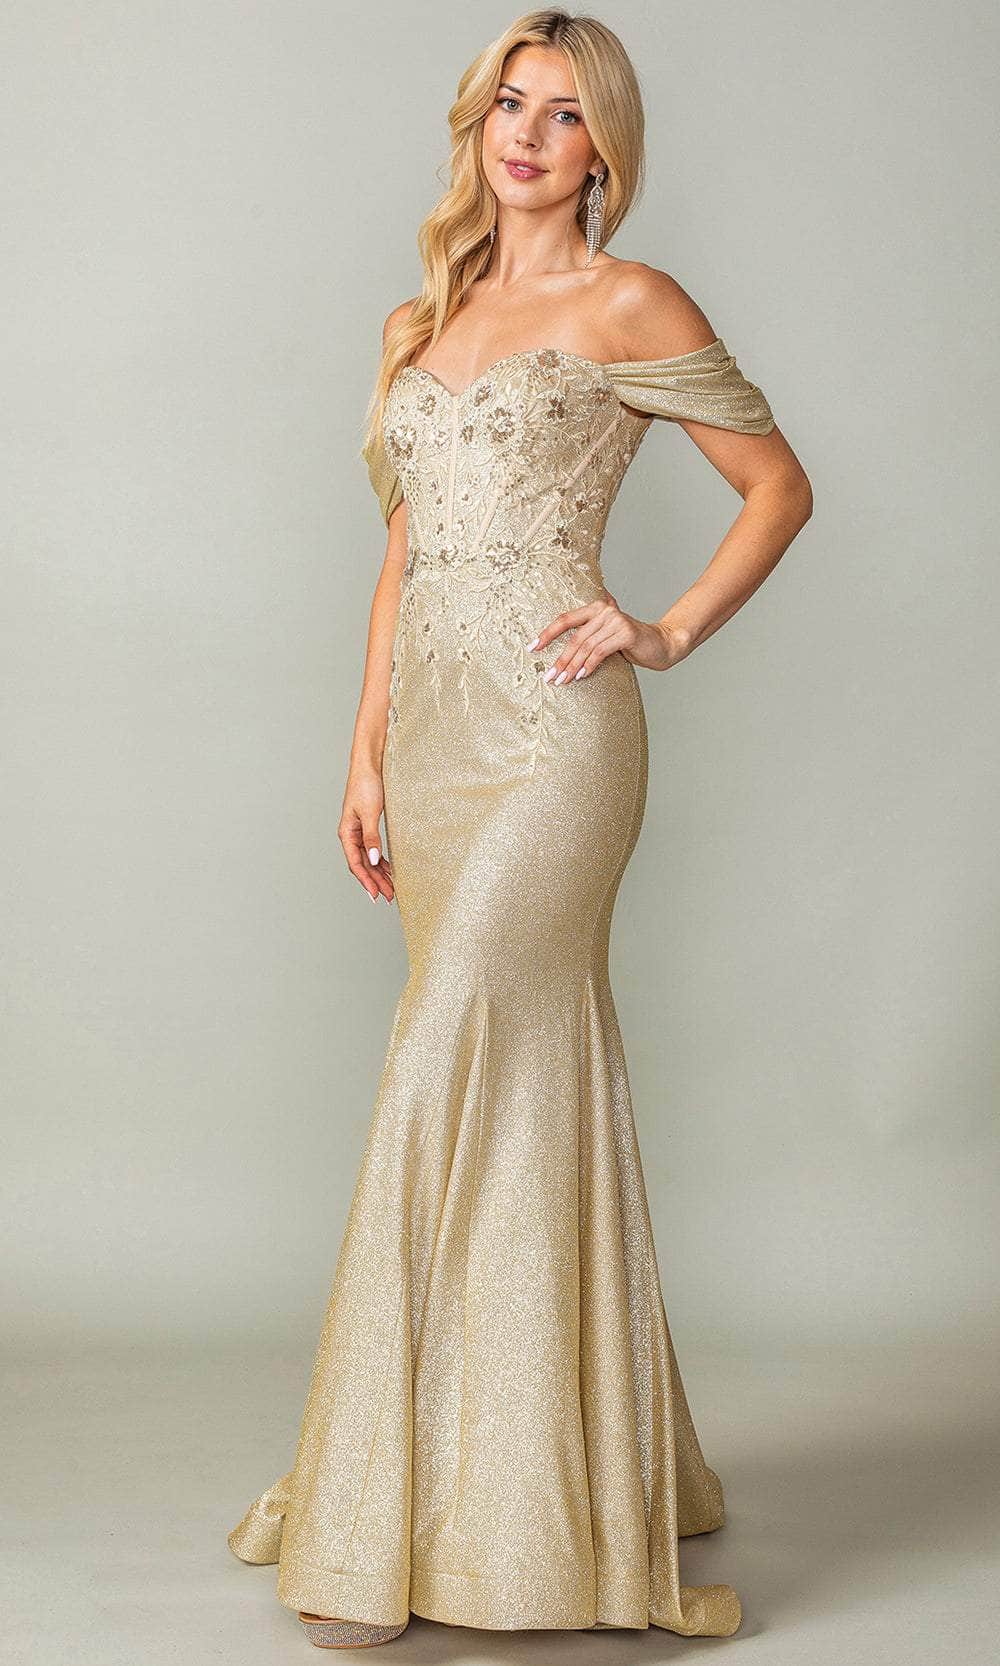 Dancing Queen 4362 - Embroidered Bodice Prom Dress